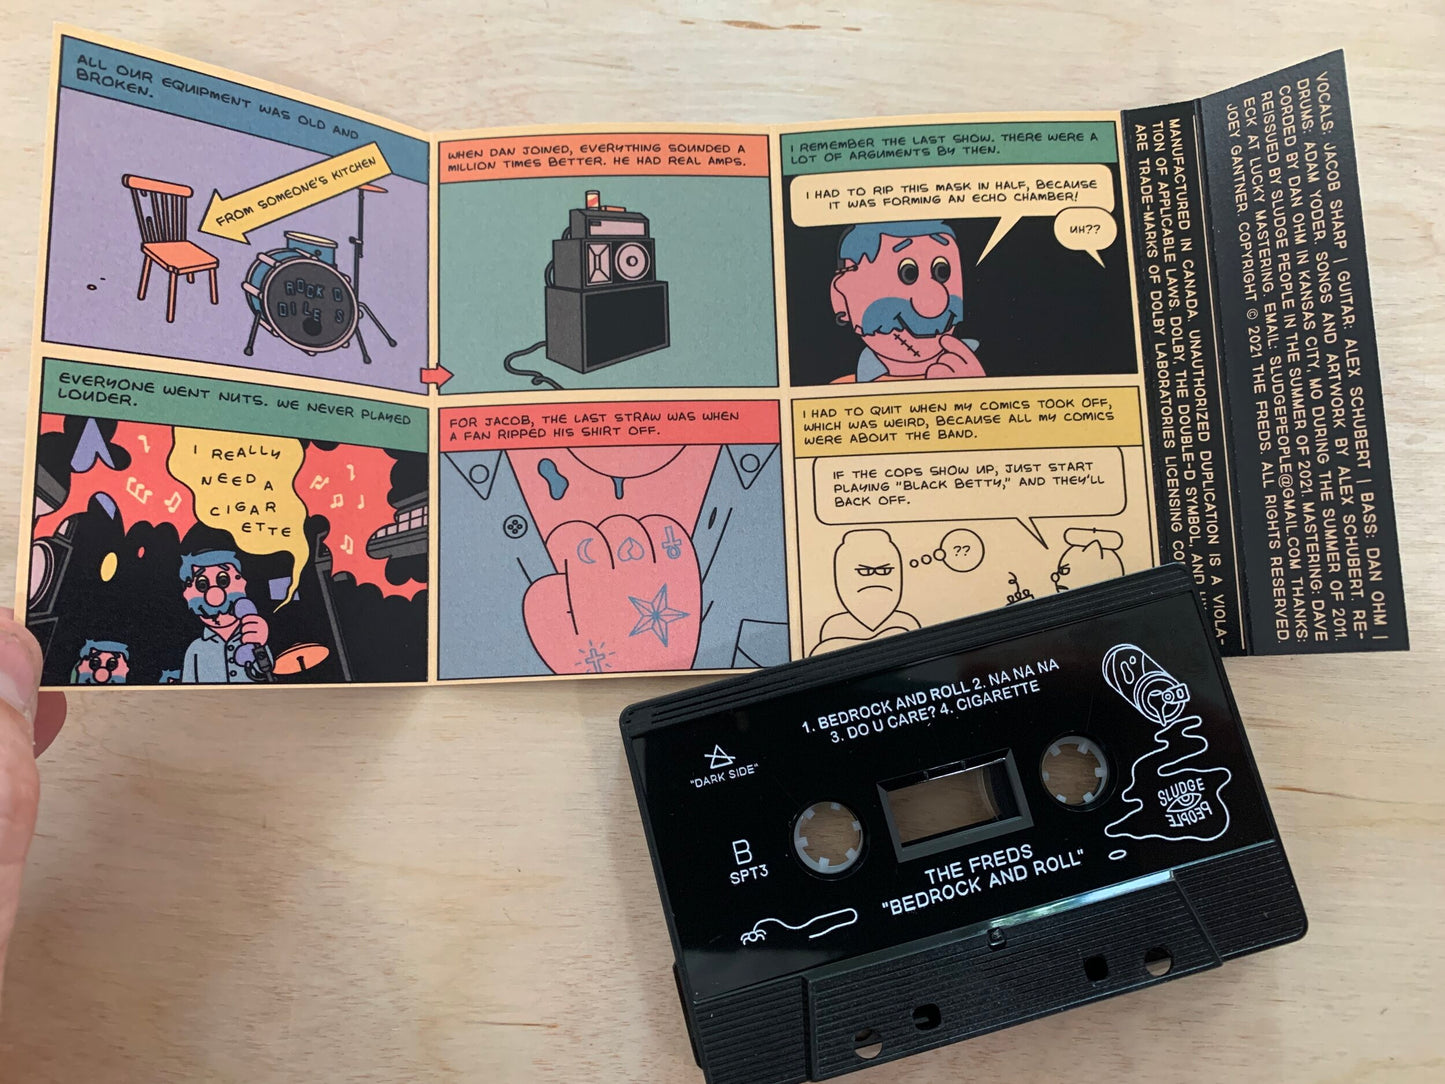 The Freds “Bedrock and Roll” (SPT3 – Cassette)